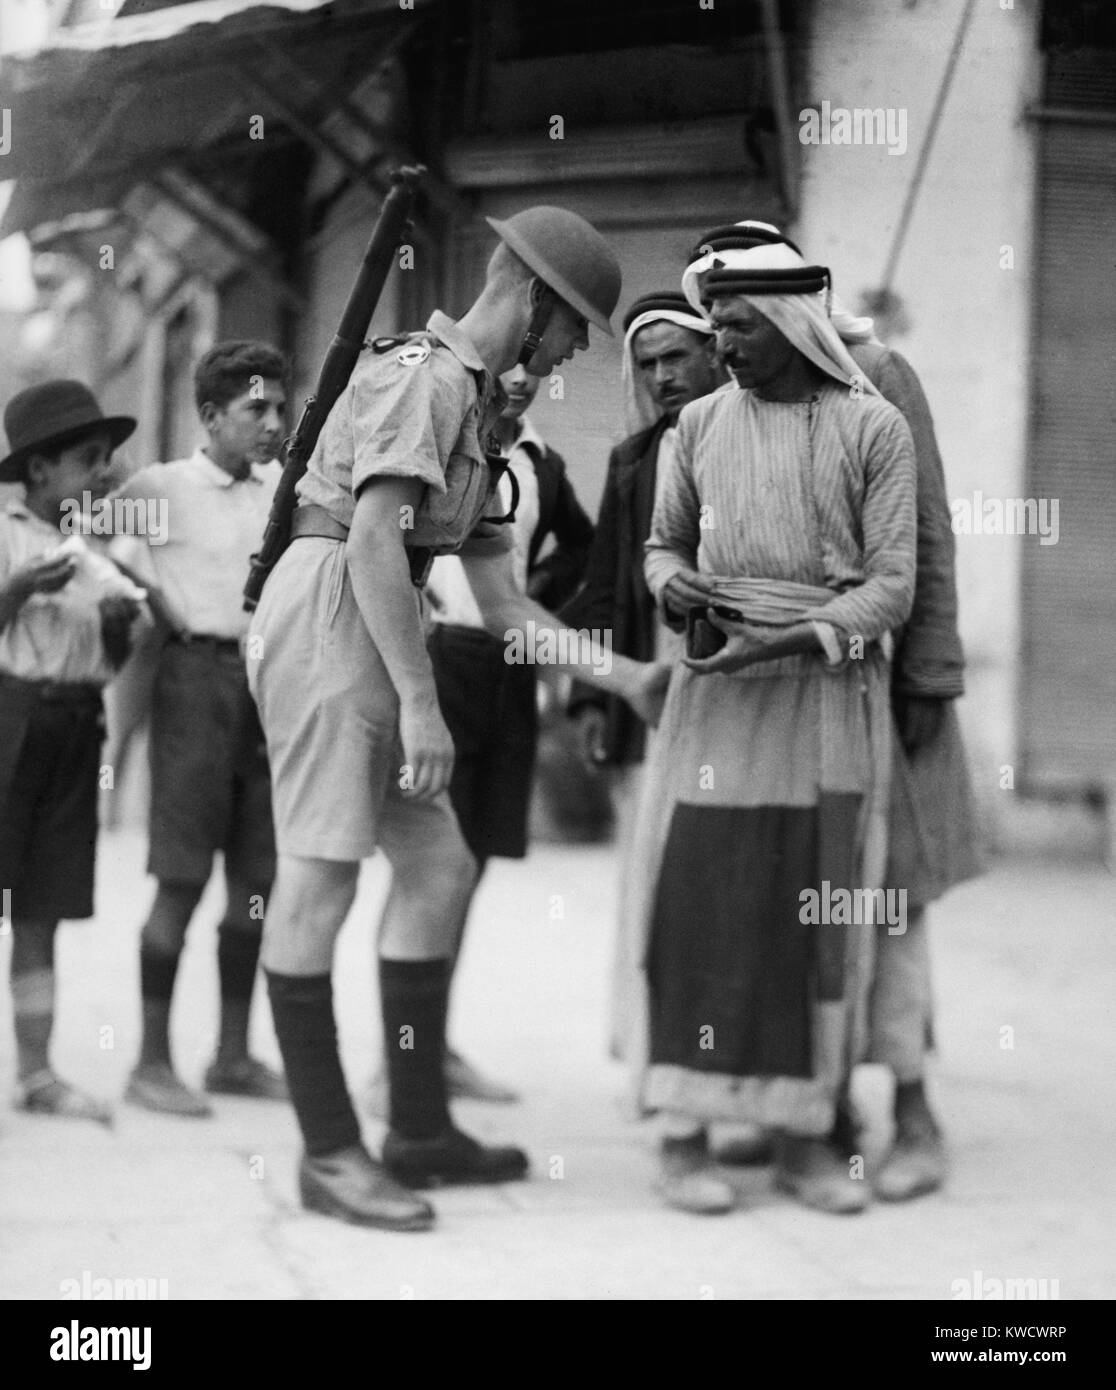 British soldier checking papers and searching Arabs for arms at the Jaffa Gate, Jerusalem. 1936 during the Arab Revolt (BSLOC 2017 1 203) Stock Photo